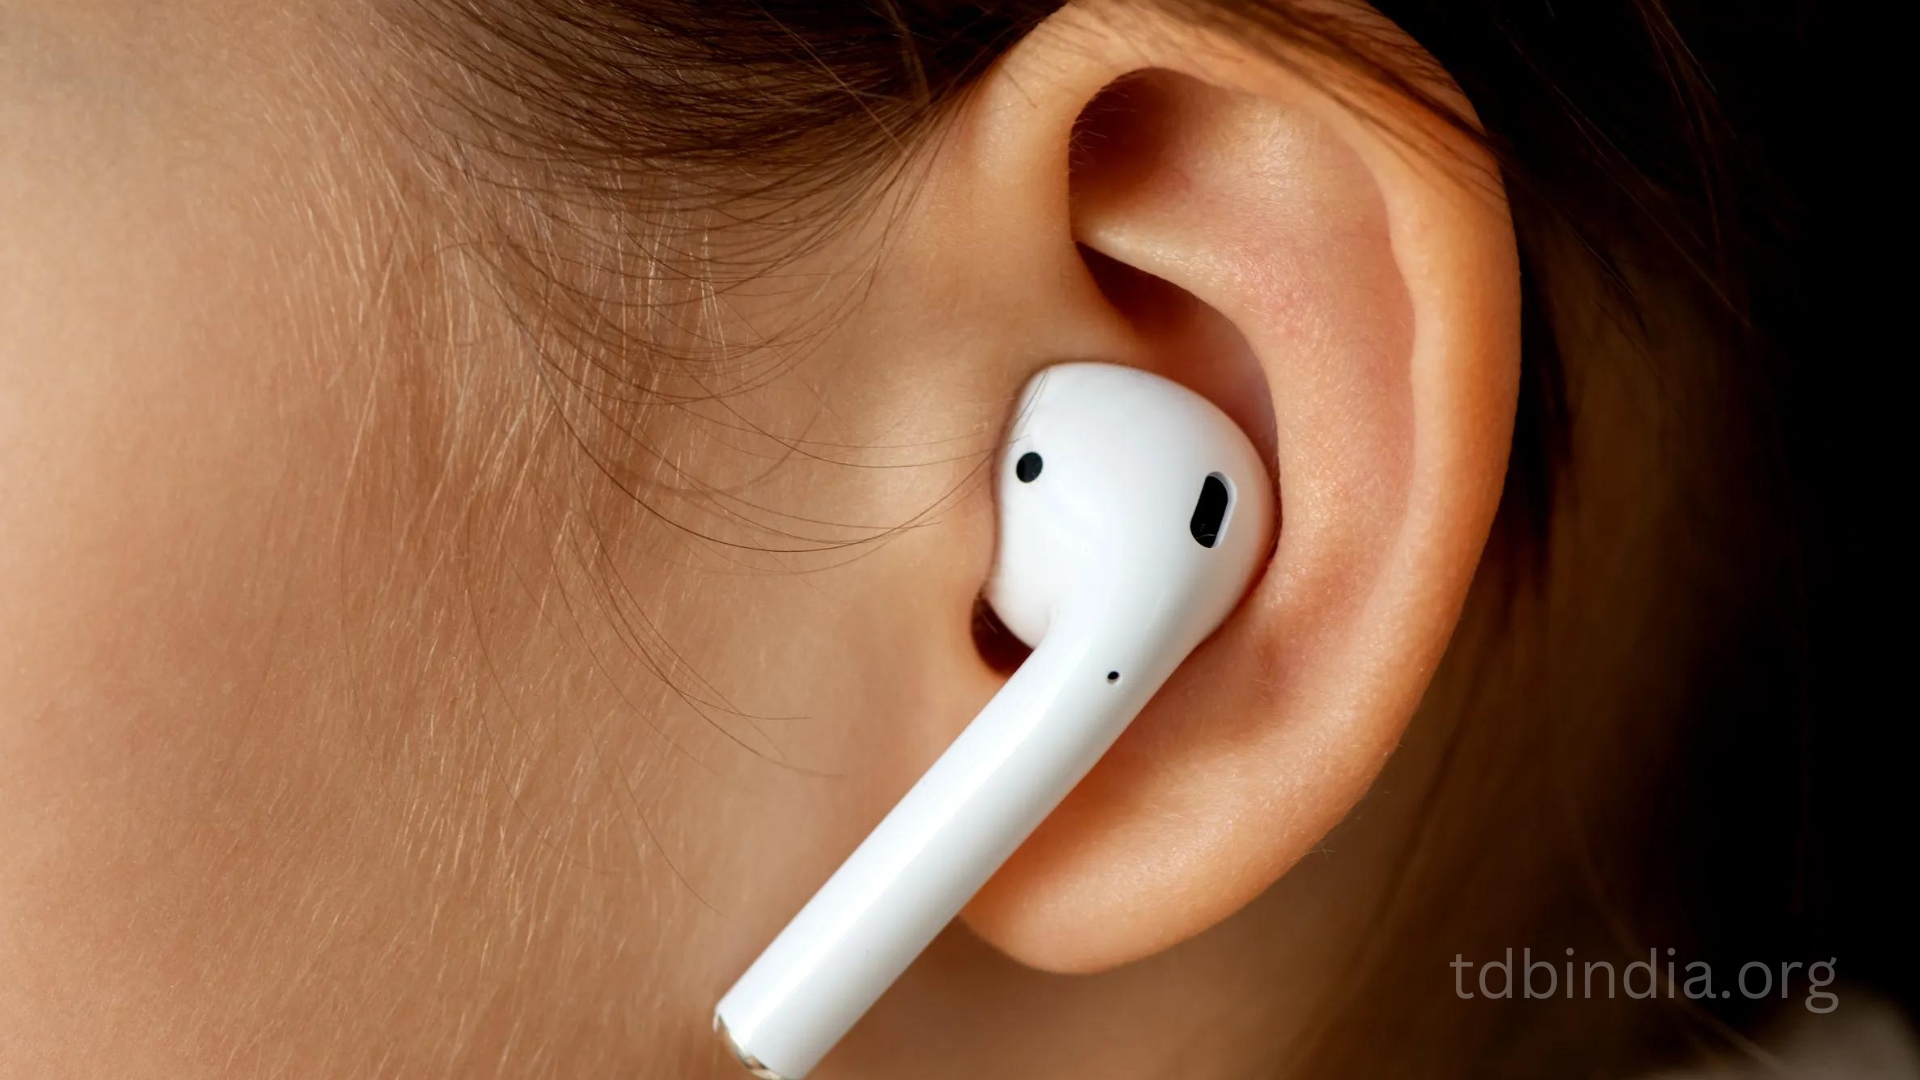 Can earbuds be used as hearing aids?